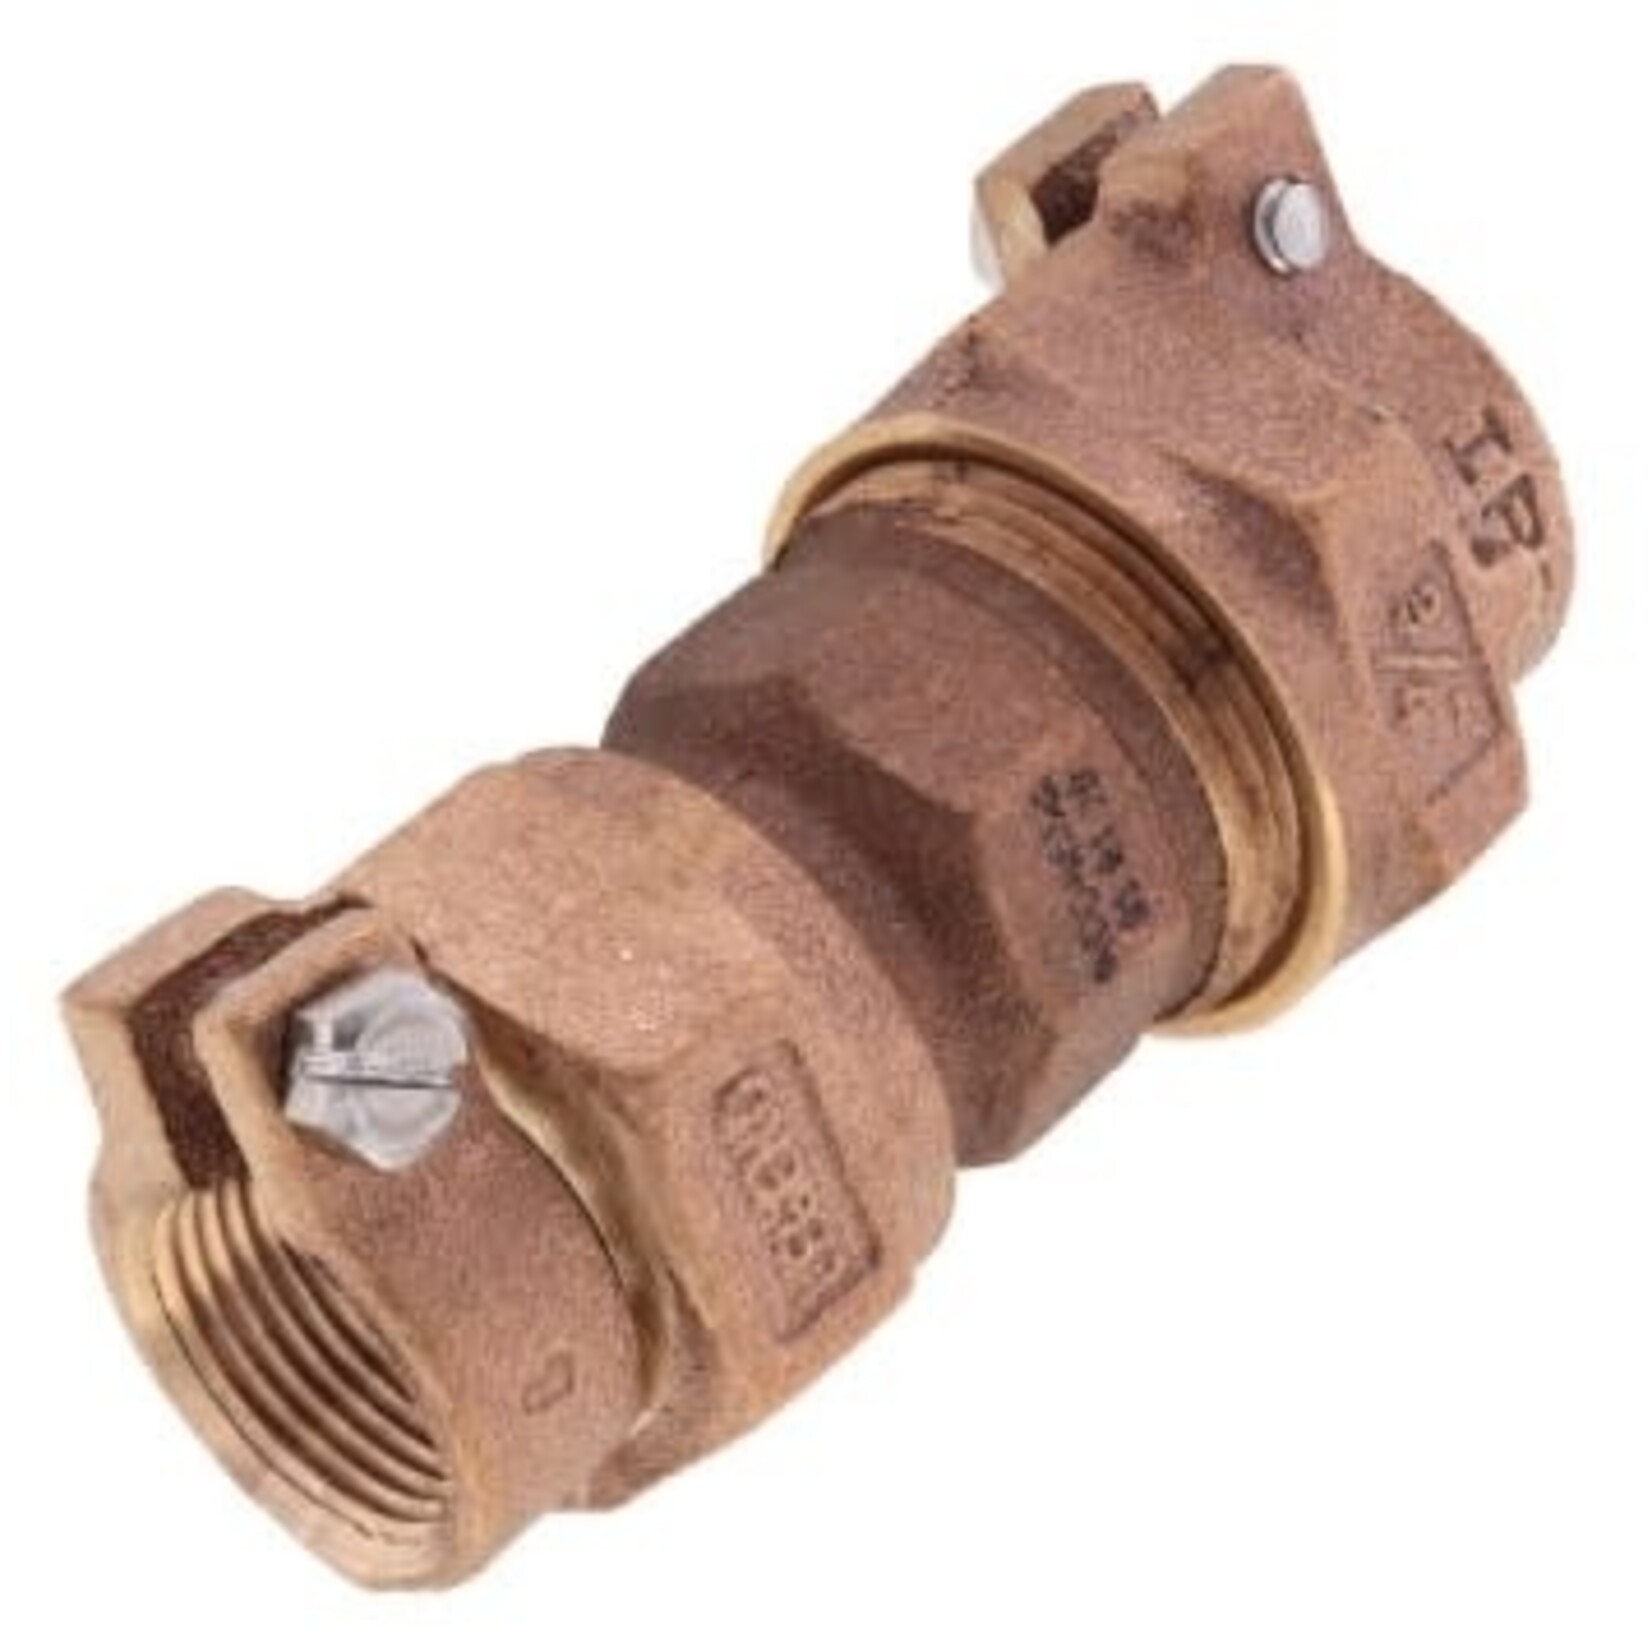 LEGEND VALVE 3/4 IN BRASS PACK JOINT COUPLING (CTS X IPS)